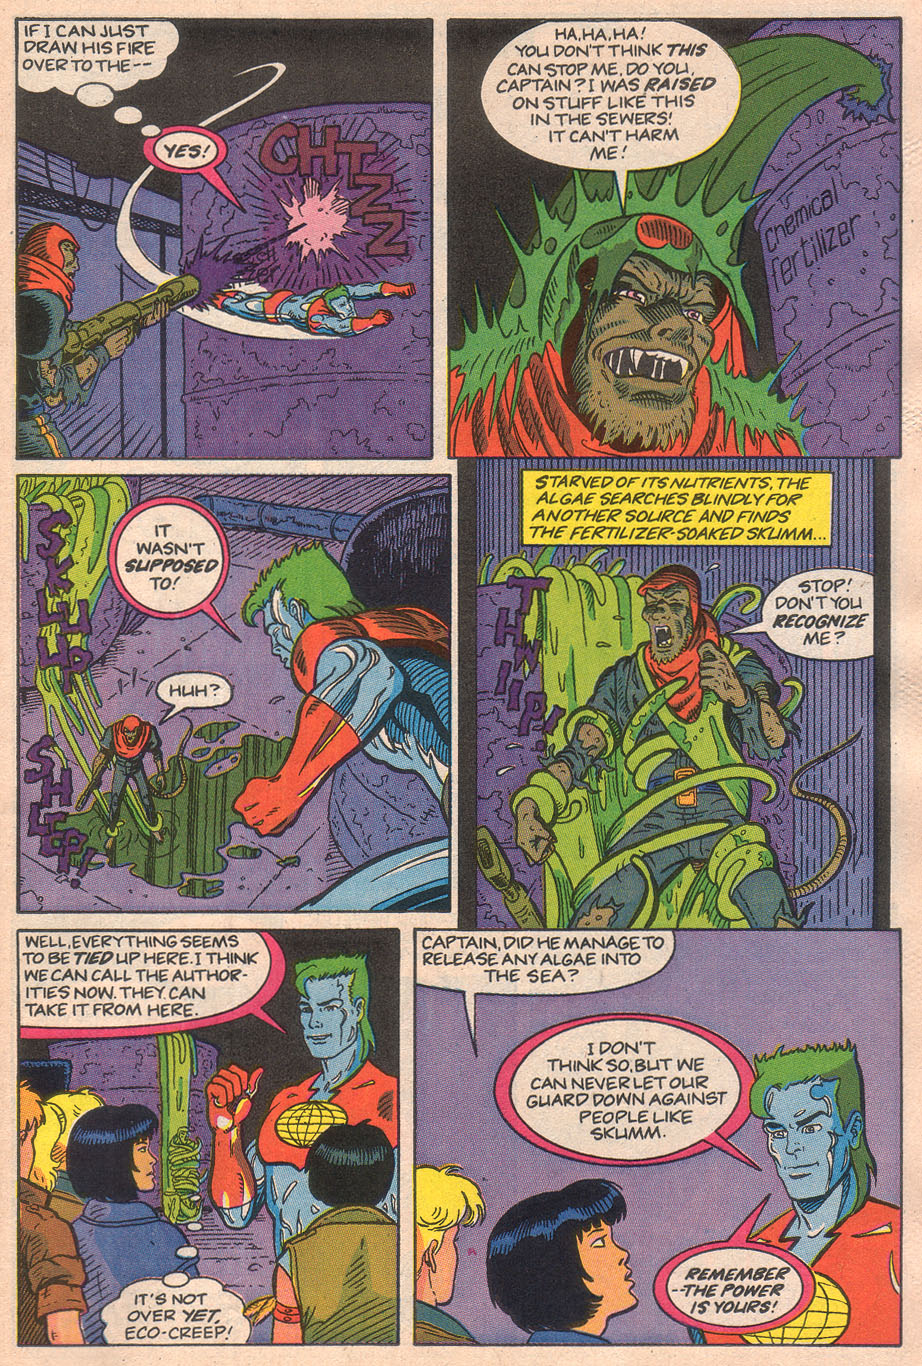 Captain Planet and the Planeteers 6 Page 30